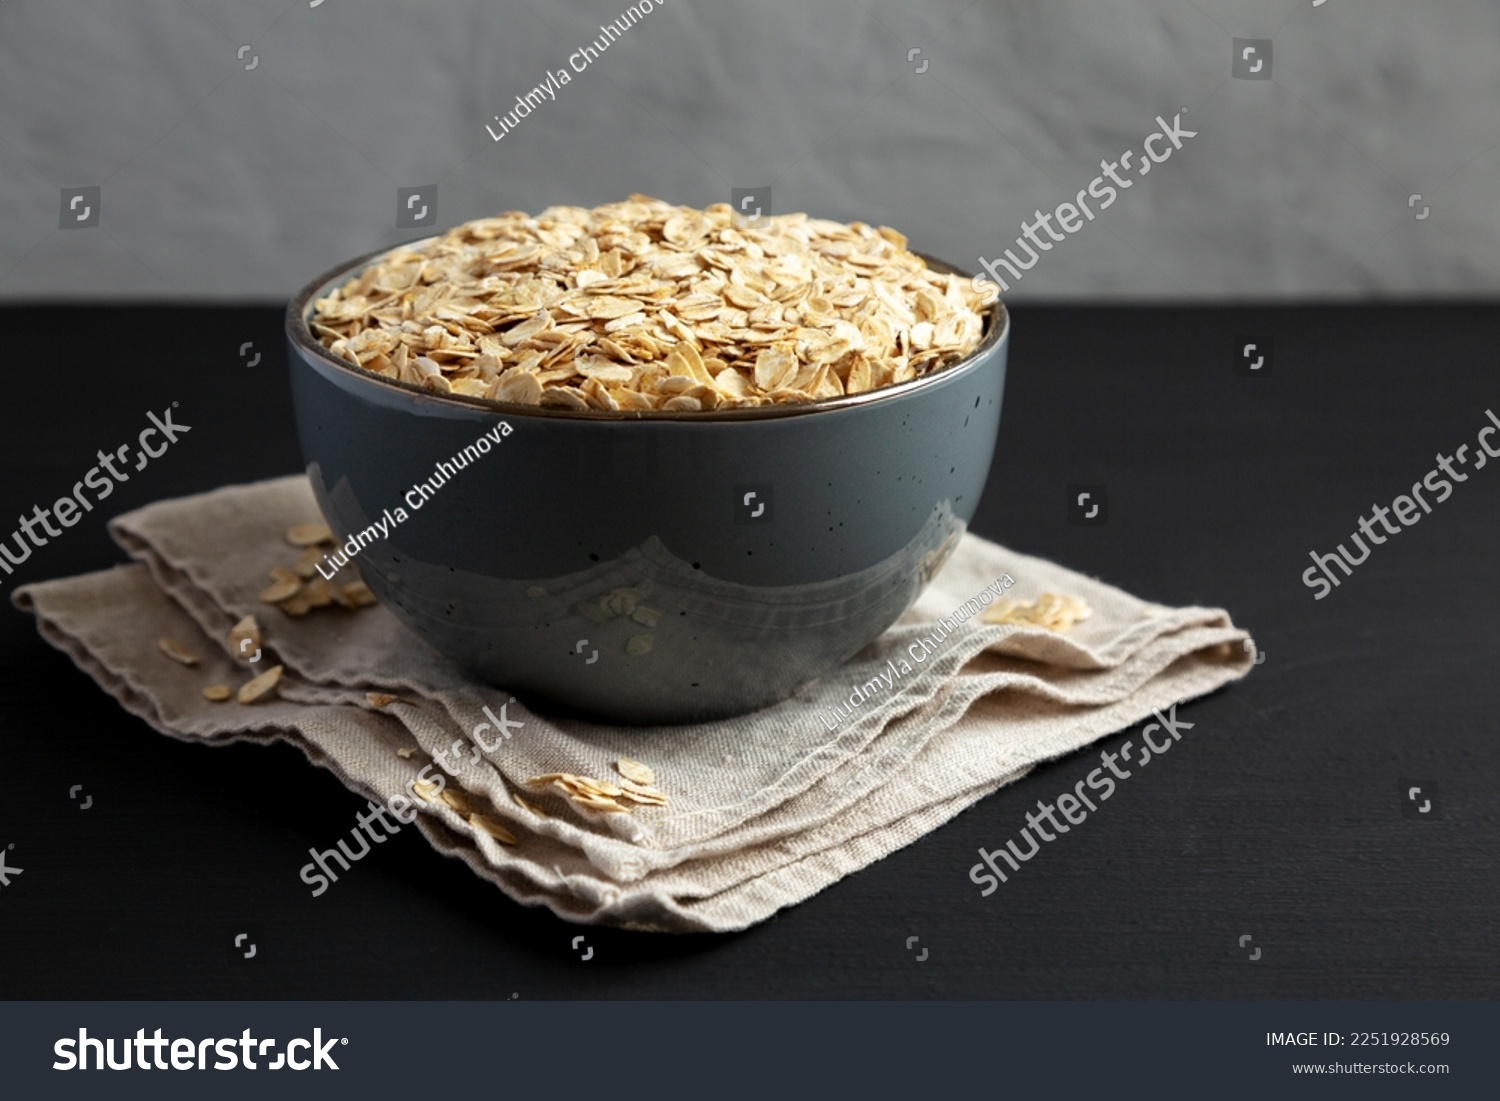 Wholegrain Oat Flakes in a Bowl on a black background, side view.  #2251928569